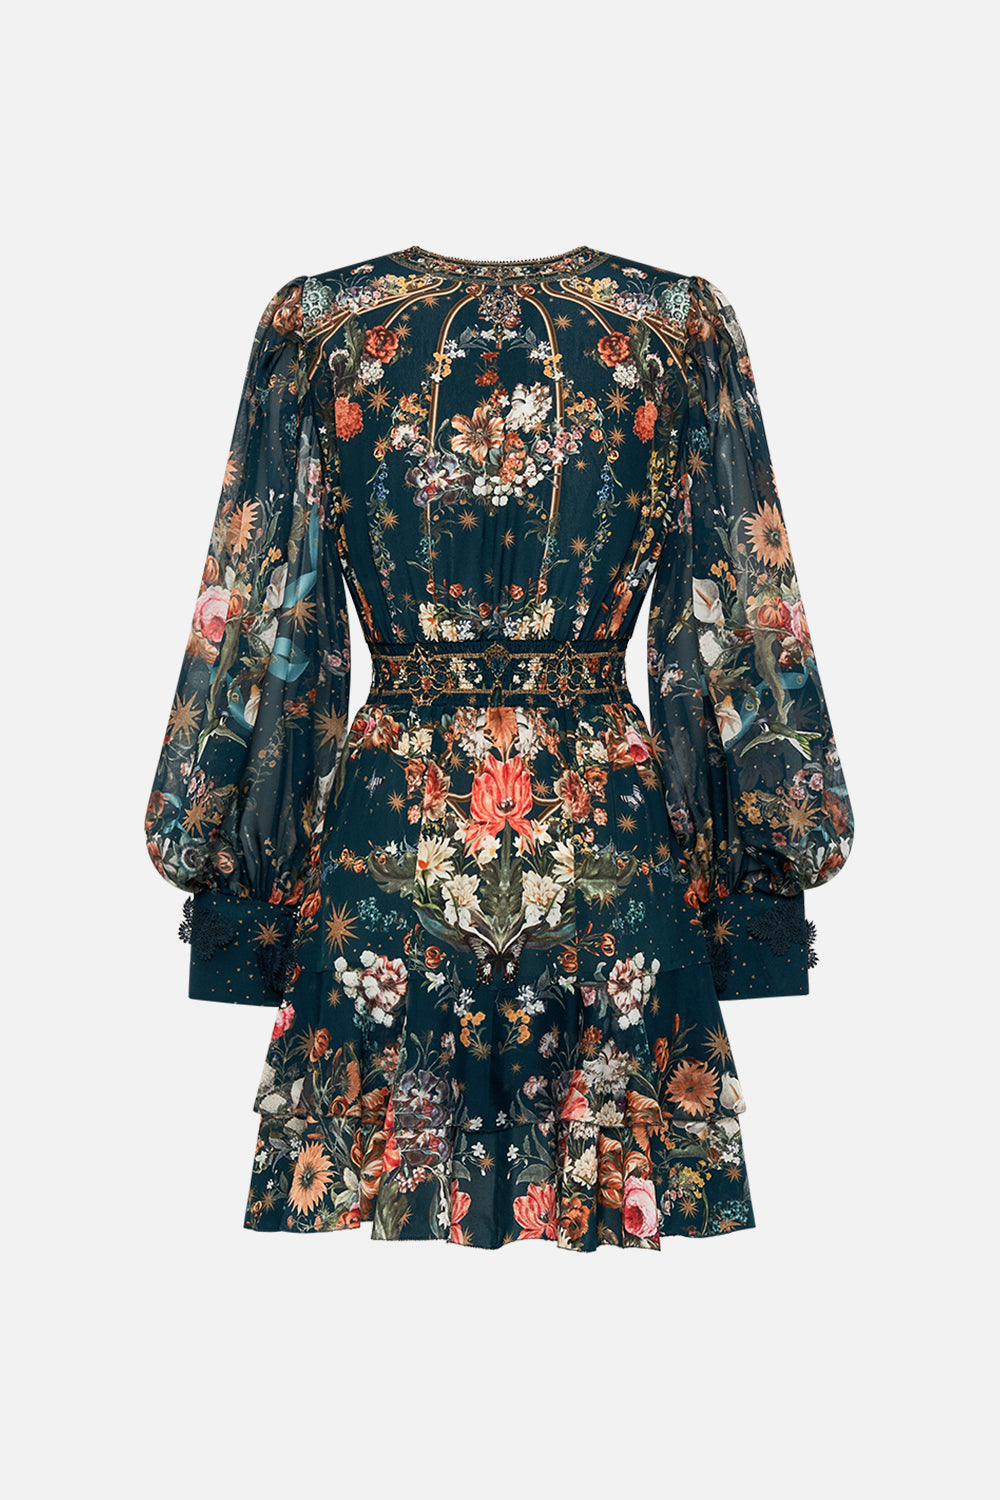 CAMILLA silk frill dress in She Who Wears The Crown print